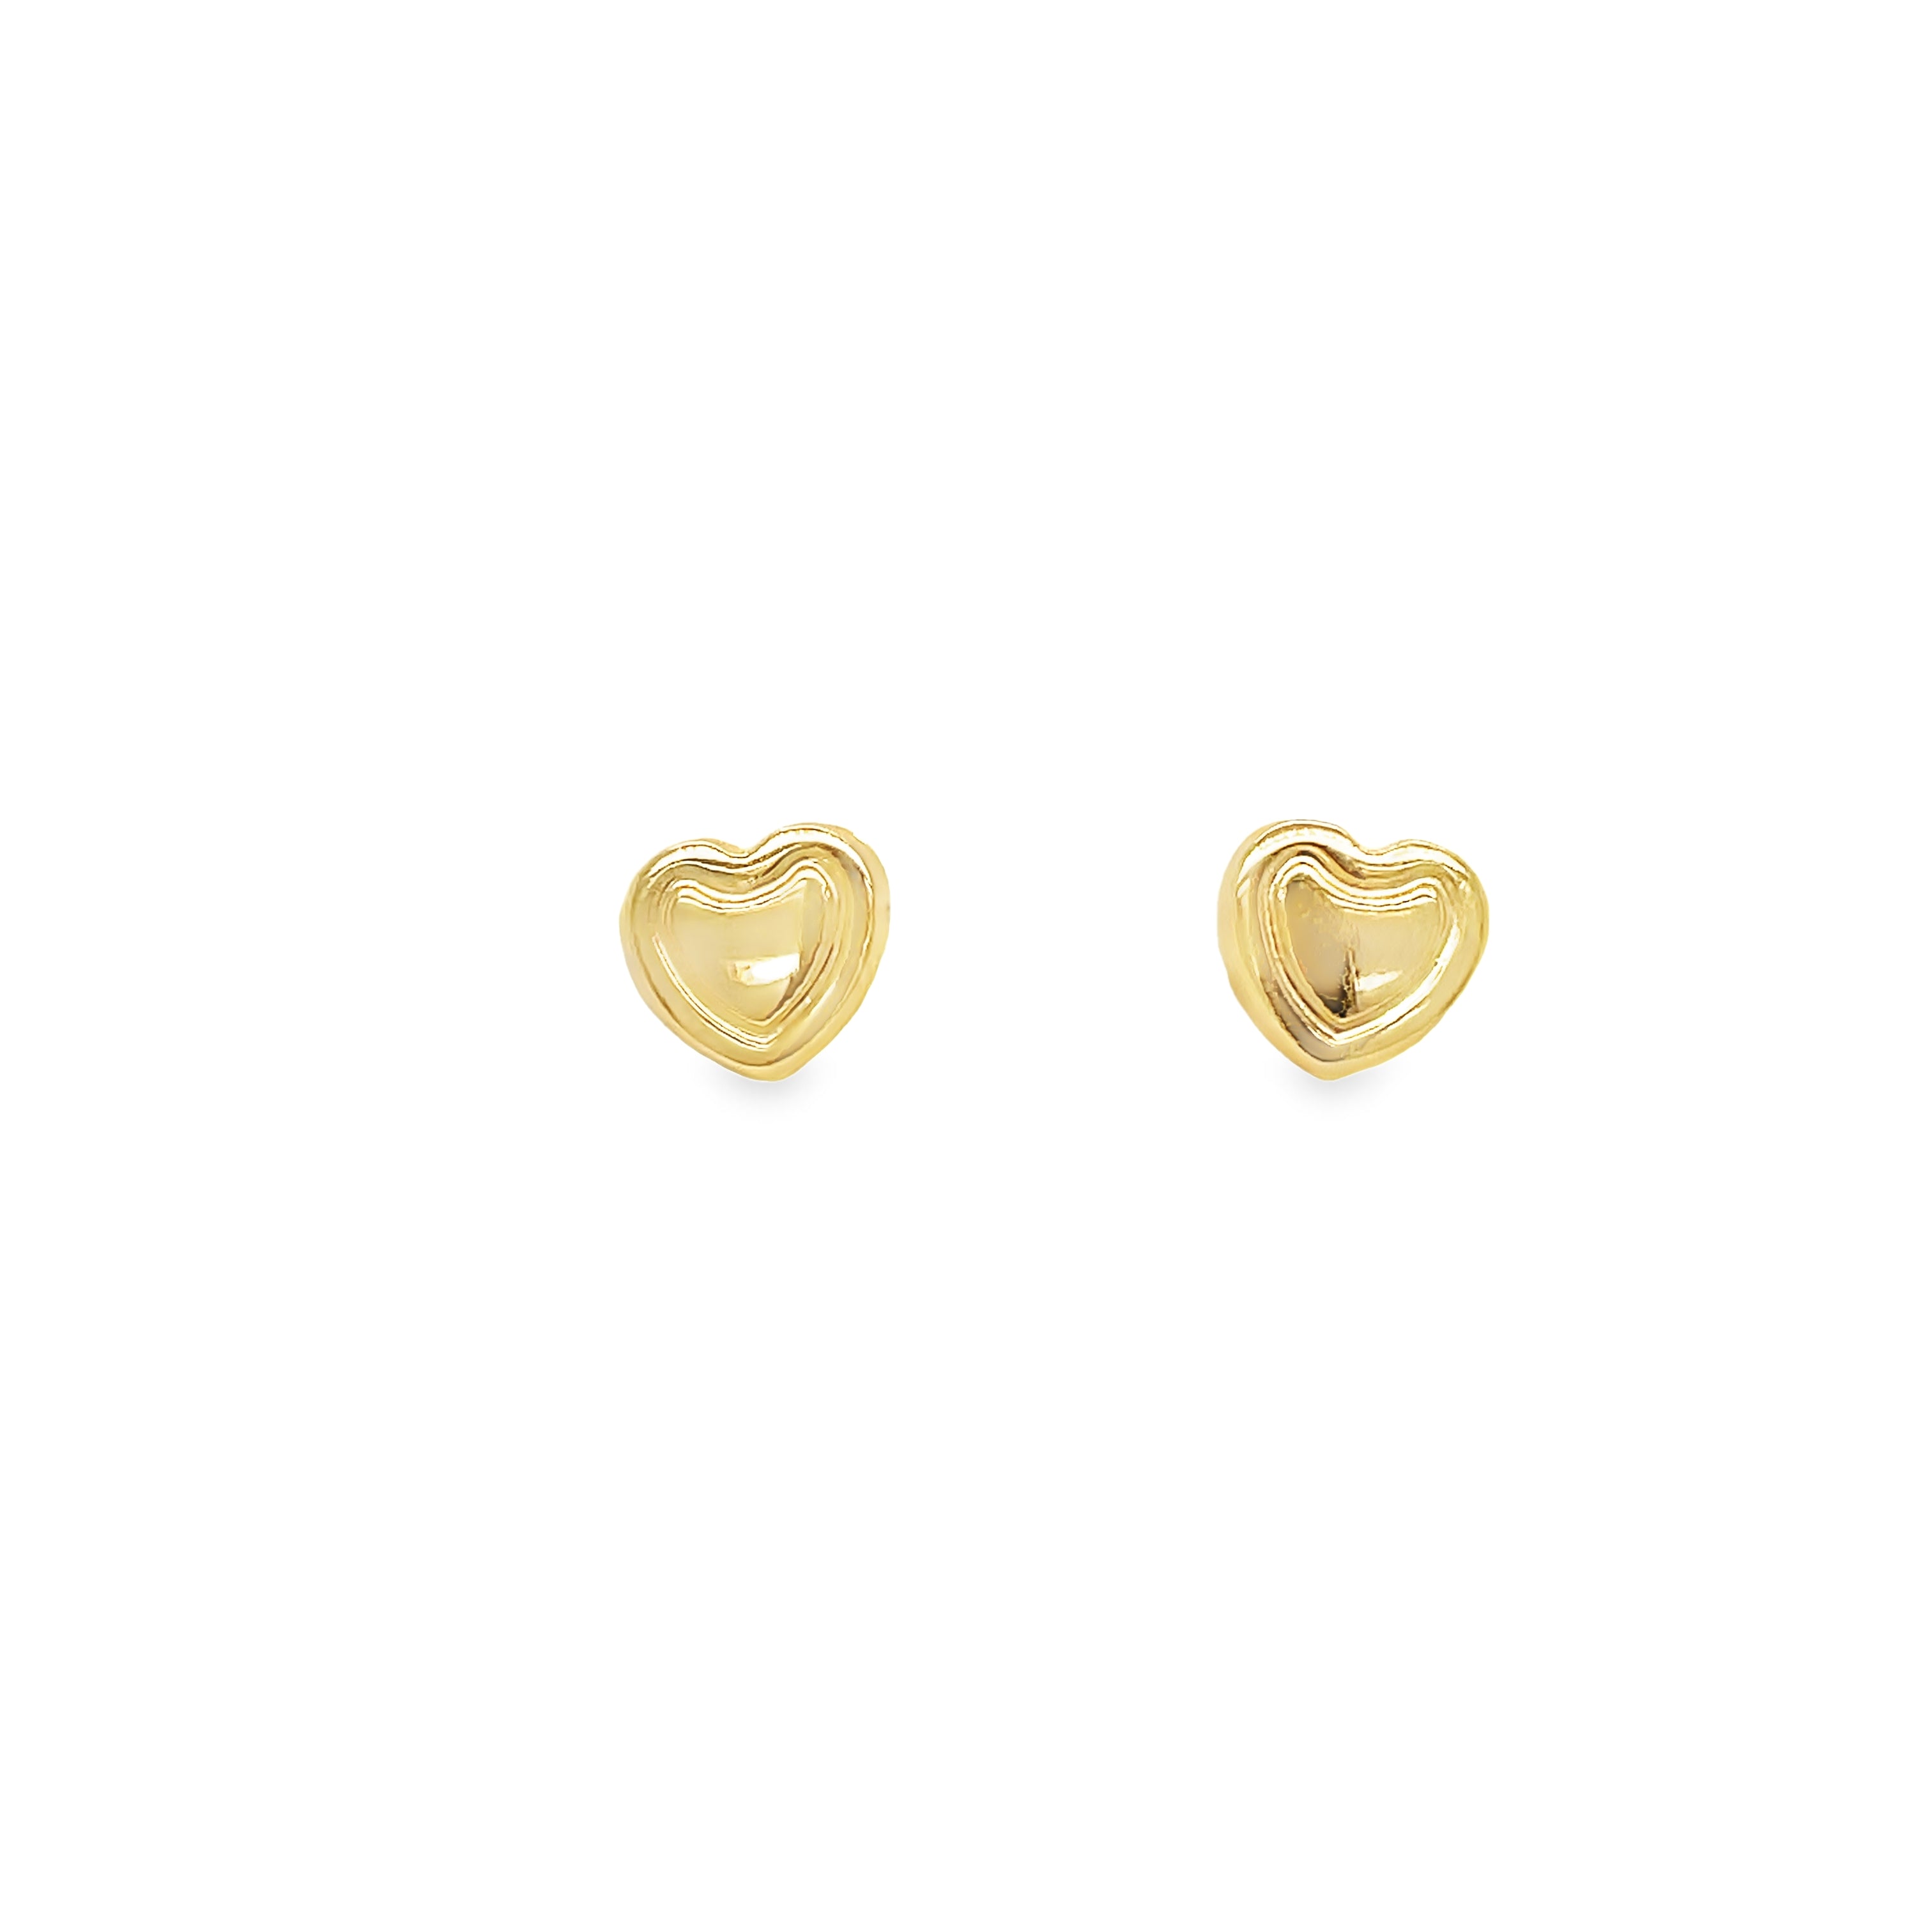 <p><span style="font-size: 0.875rem;">Delicate 14K yellow gold heart shape Baby Earrings with secure baby backs. Expertly crafted for optimal comfort and beauty.</span></p> <p>&nbsp;</p>